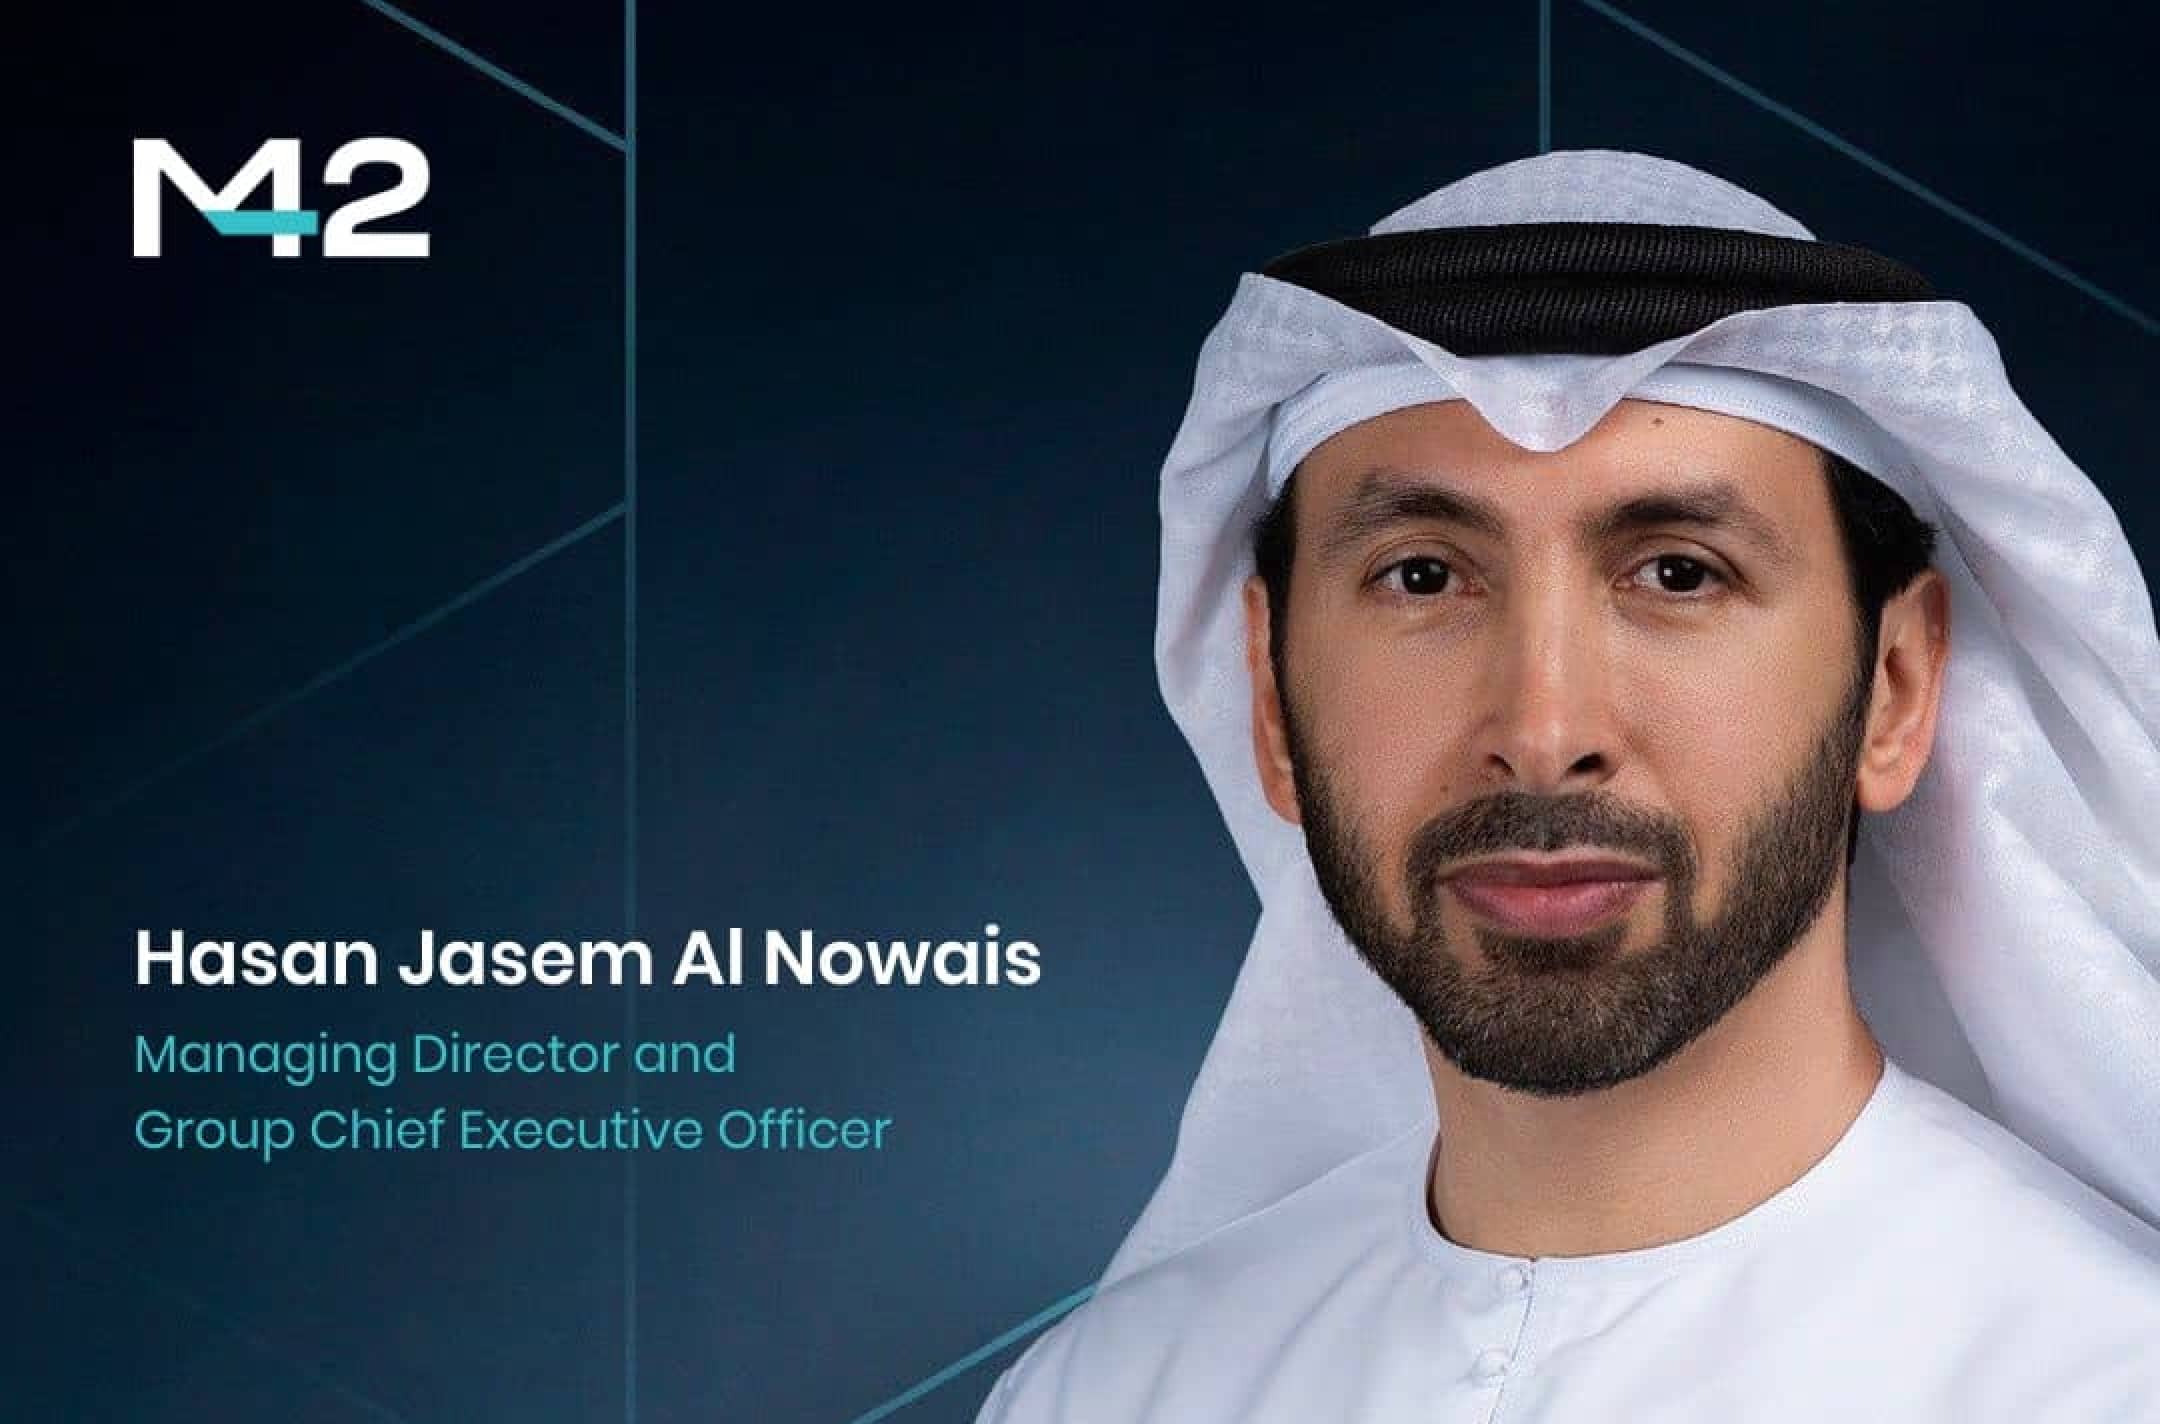 hasan jasem al nowais md and group chief executive officer